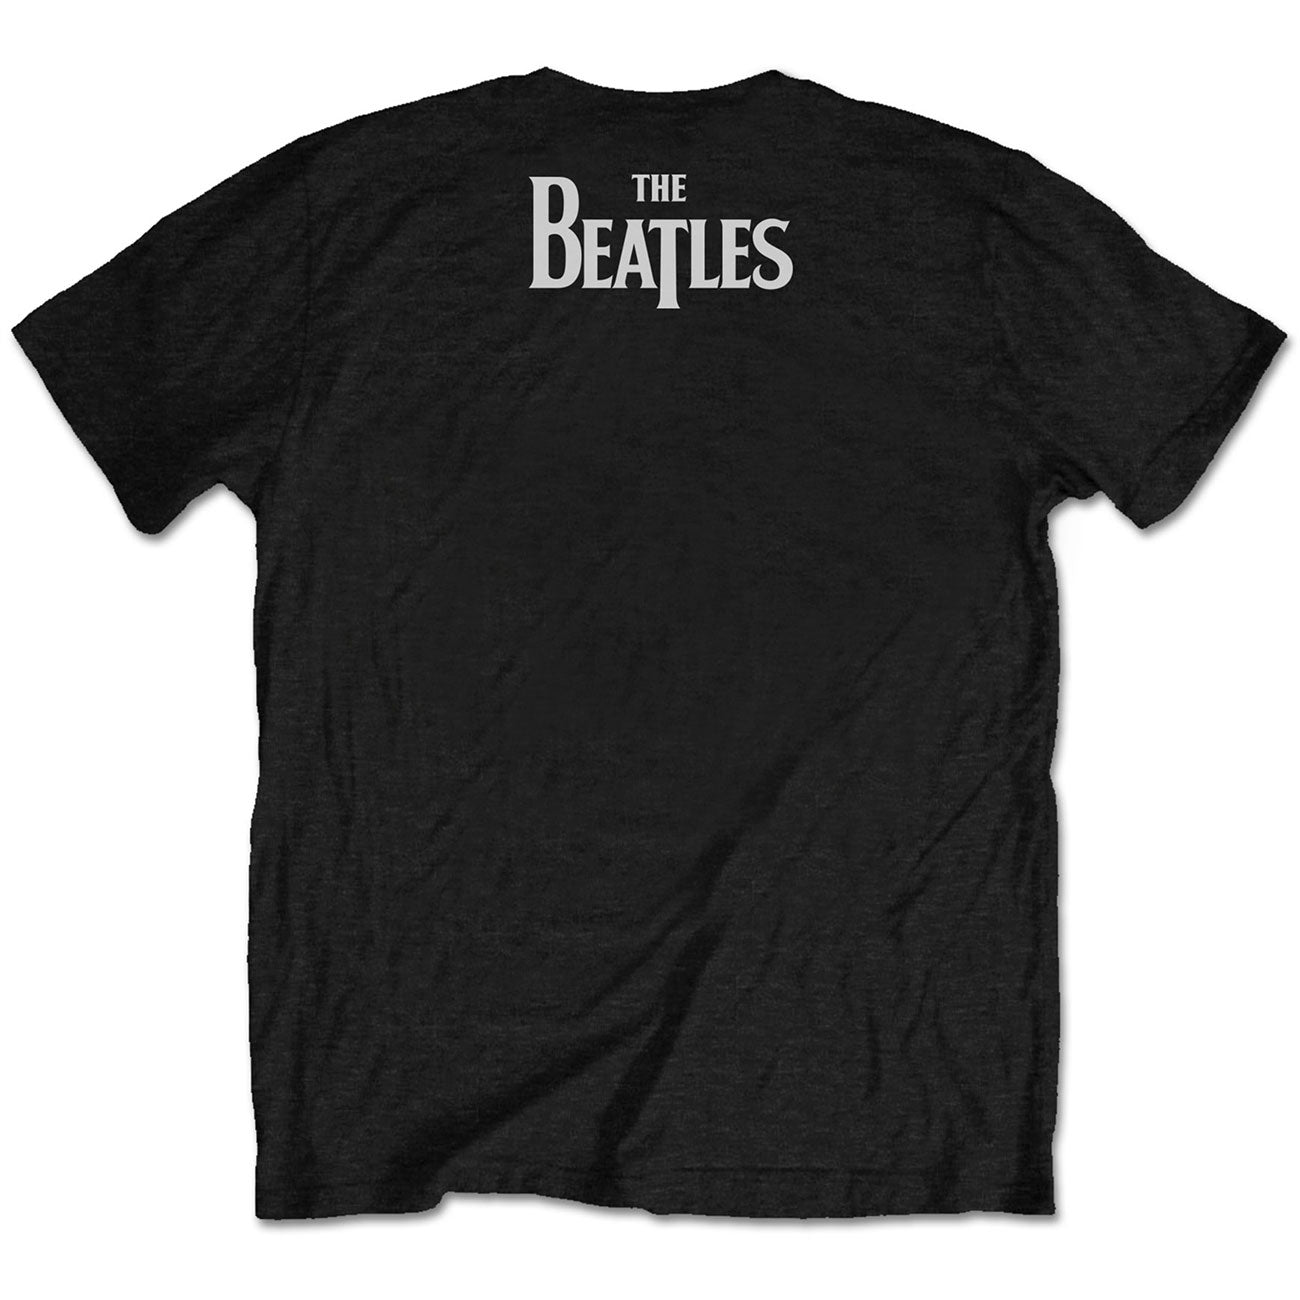 The Beatles T-Shirt - 3 Saville Row - Unisex Official Licensed Design